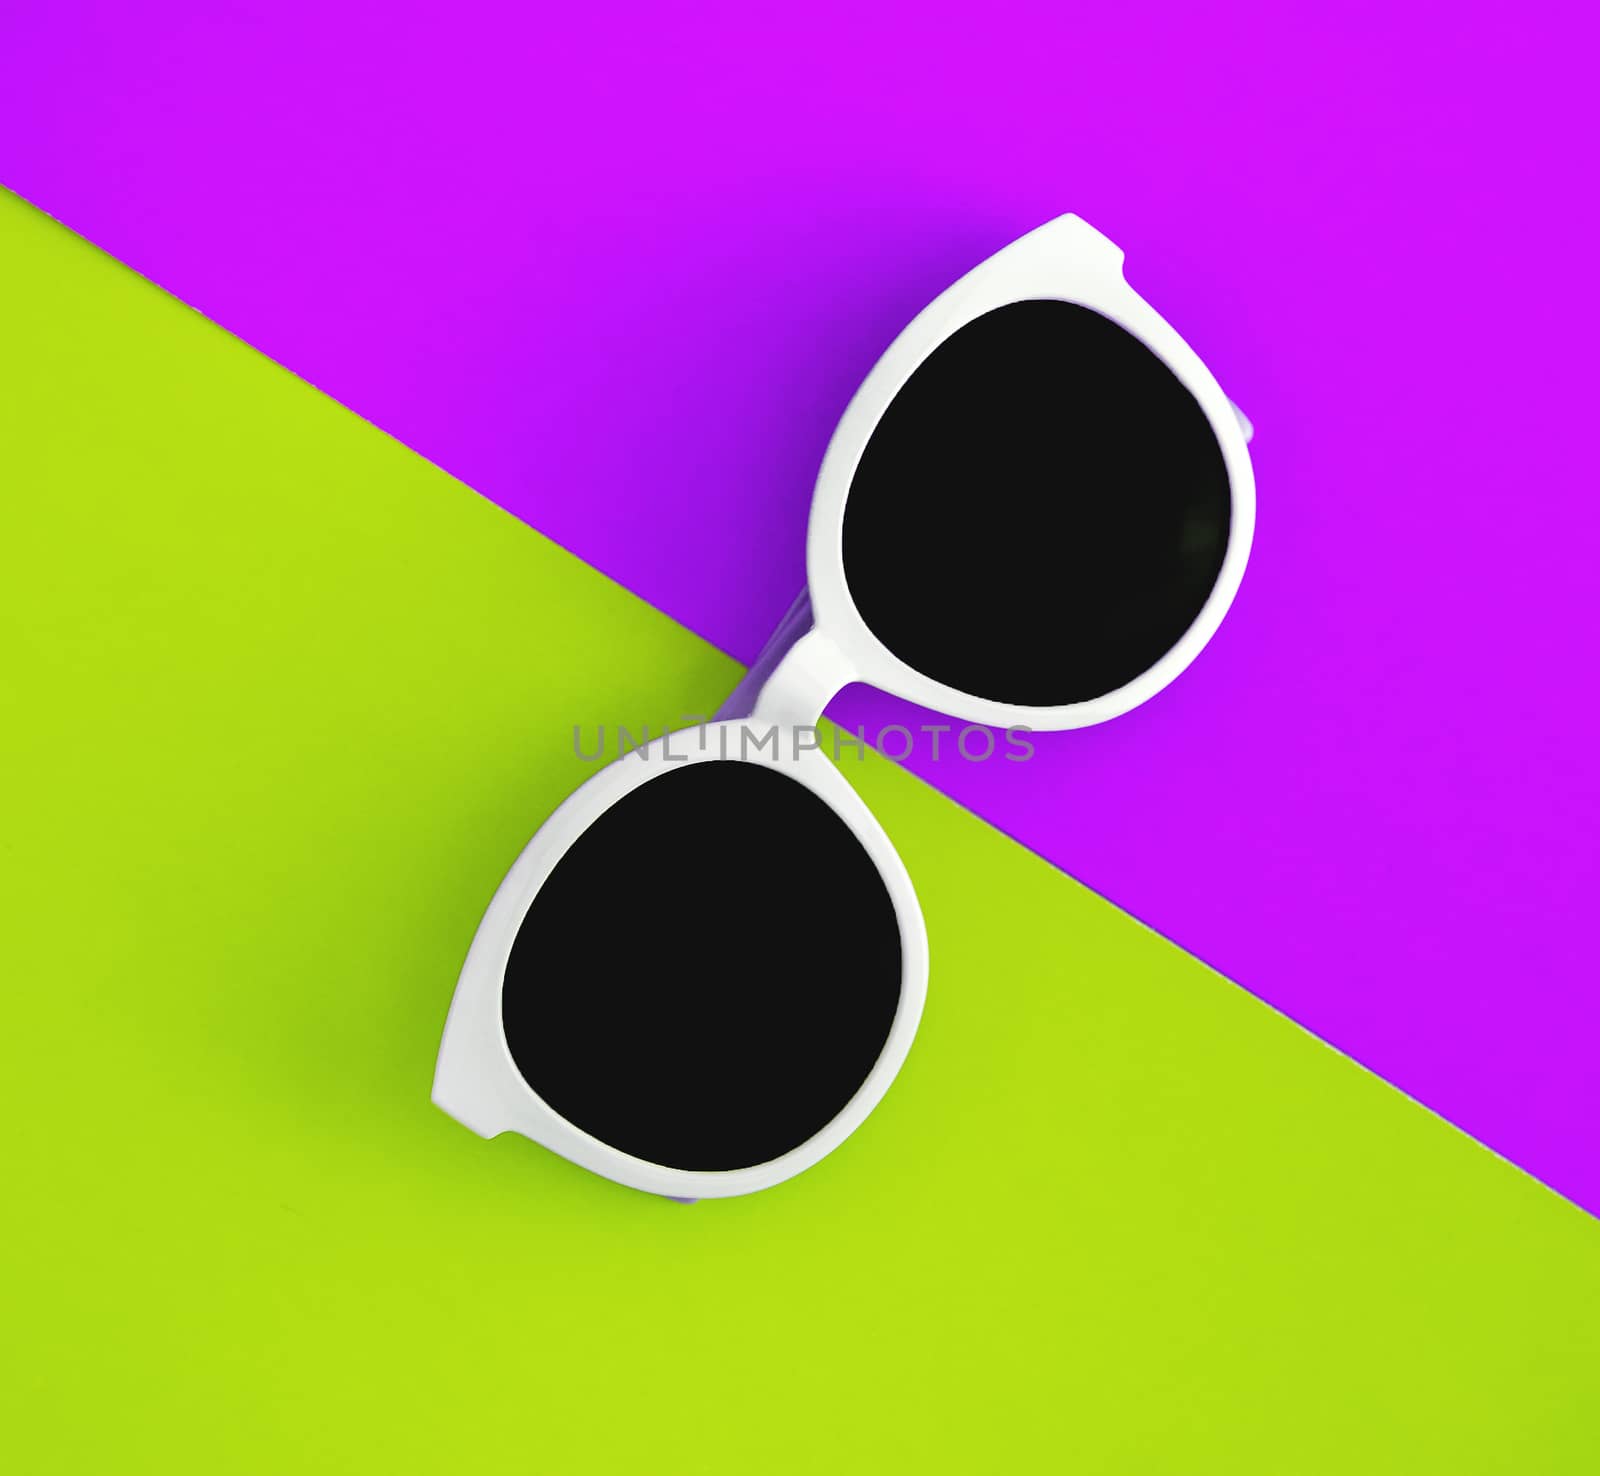 Sunny stylish white sunglasses on a bright purple-lilac and yellow-green background, top view, isolated. Copy space. Flat lay.